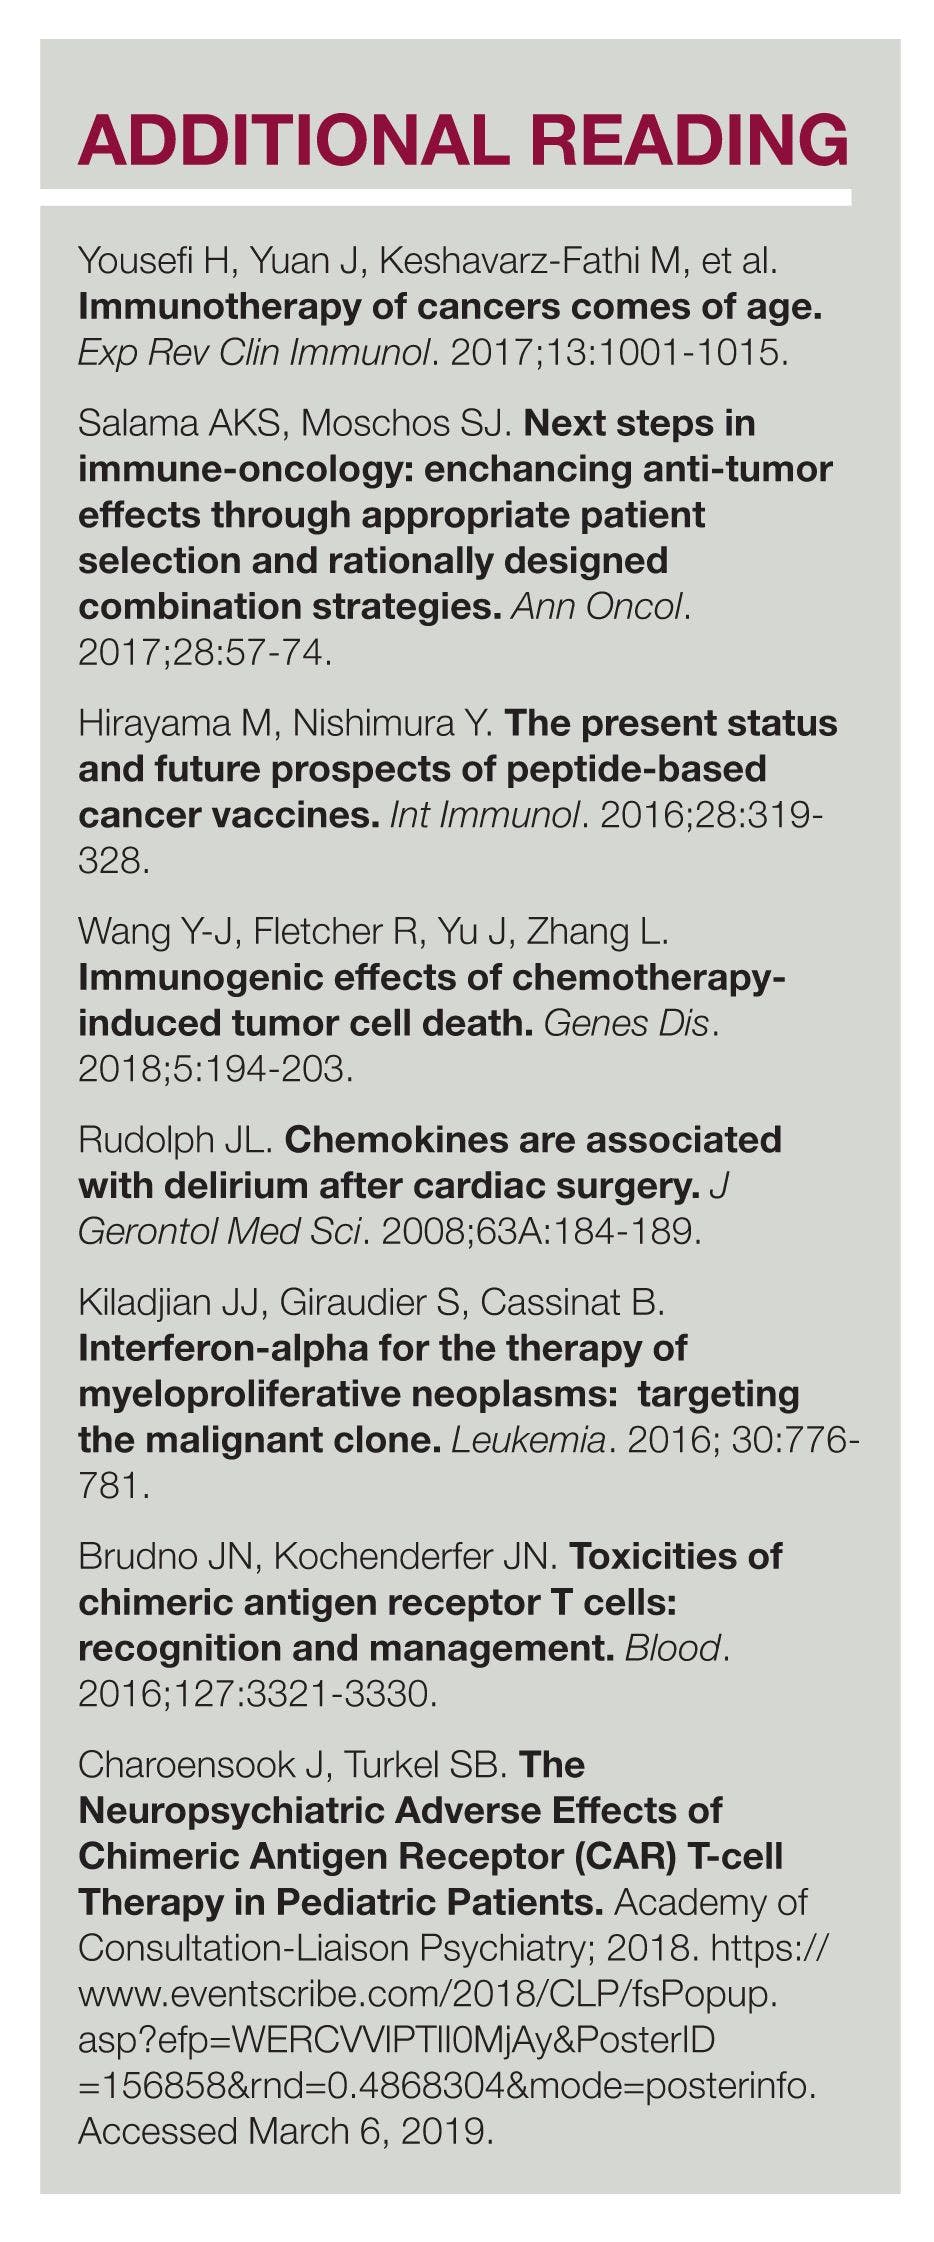 additional reading - Immunotherapy of Malignancies